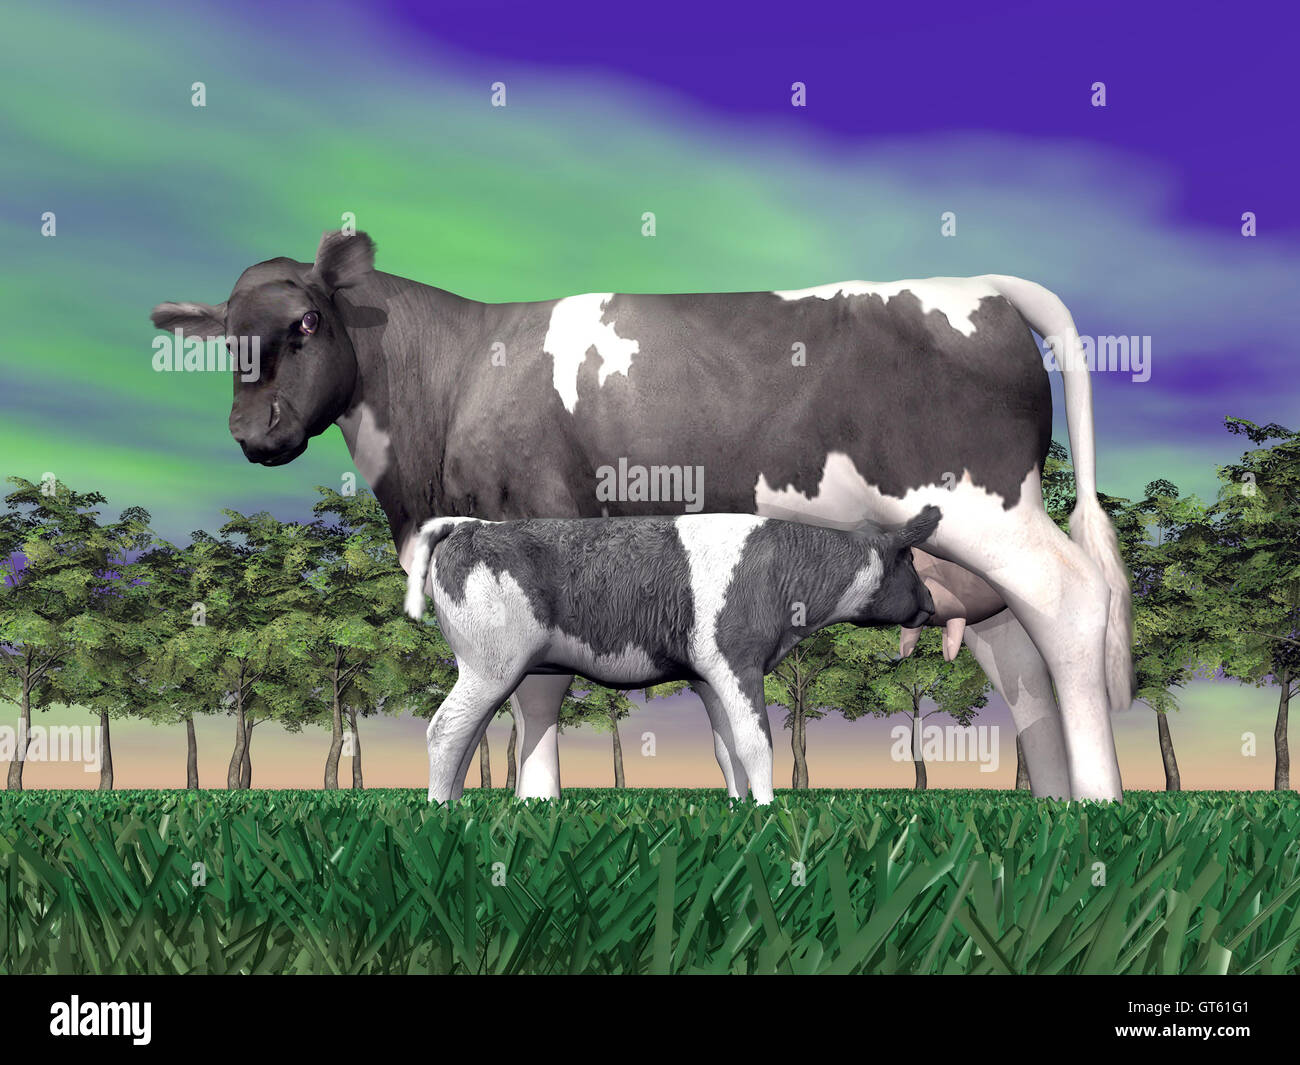 5,255 Kawaii Cow Images, Stock Photos, 3D objects, & Vectors